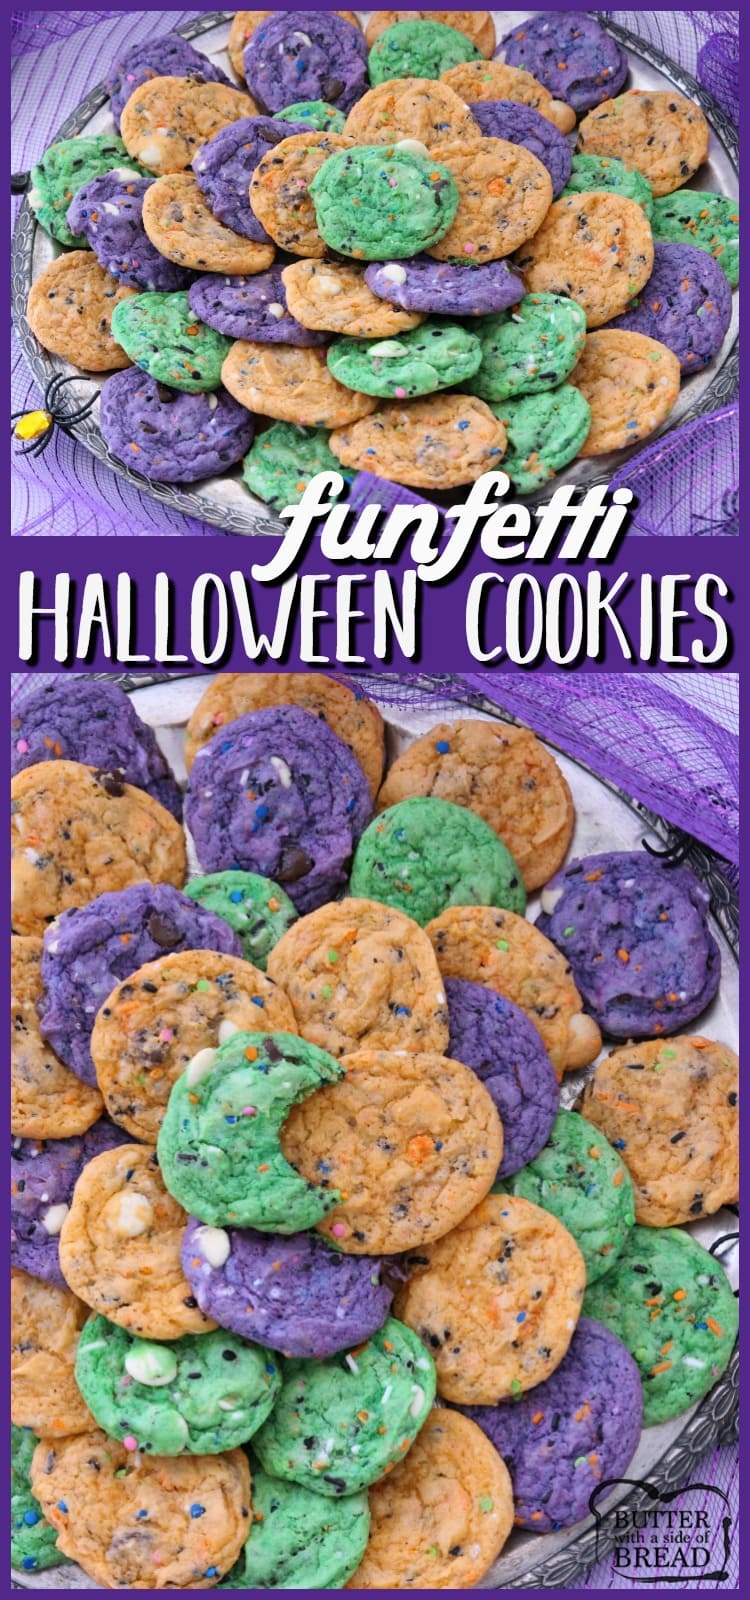 Funfetti Halloween Cookies are tasty & spooky treats made colorful with festive sprinkles baked into each cookie. We added pudding mix for texture and color for FUN!